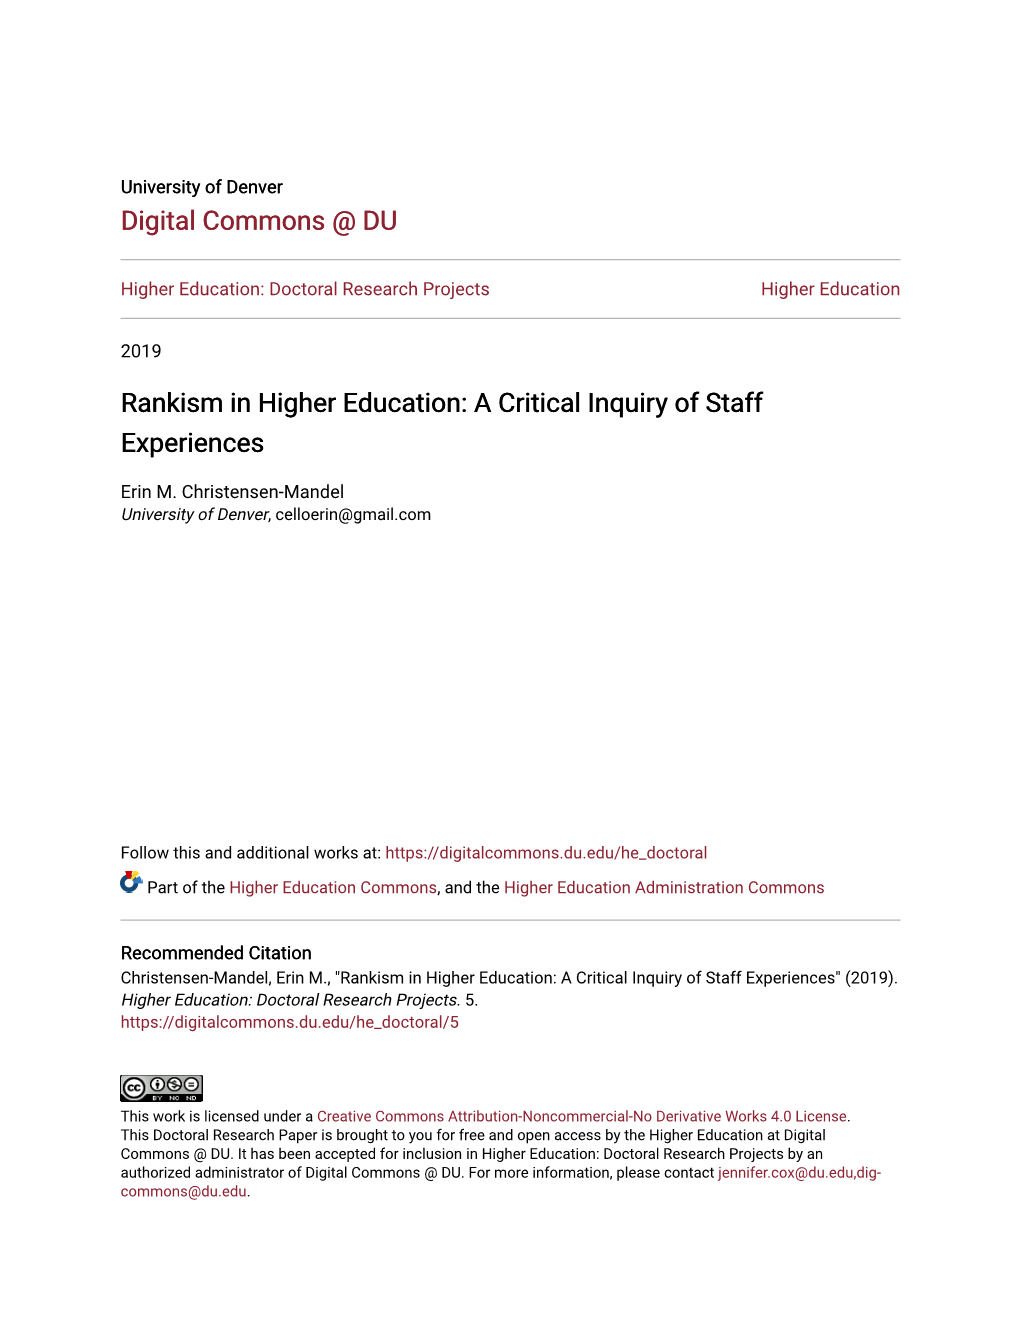 Rankism in Higher Education: a Critical Inquiry of Staff Experiences